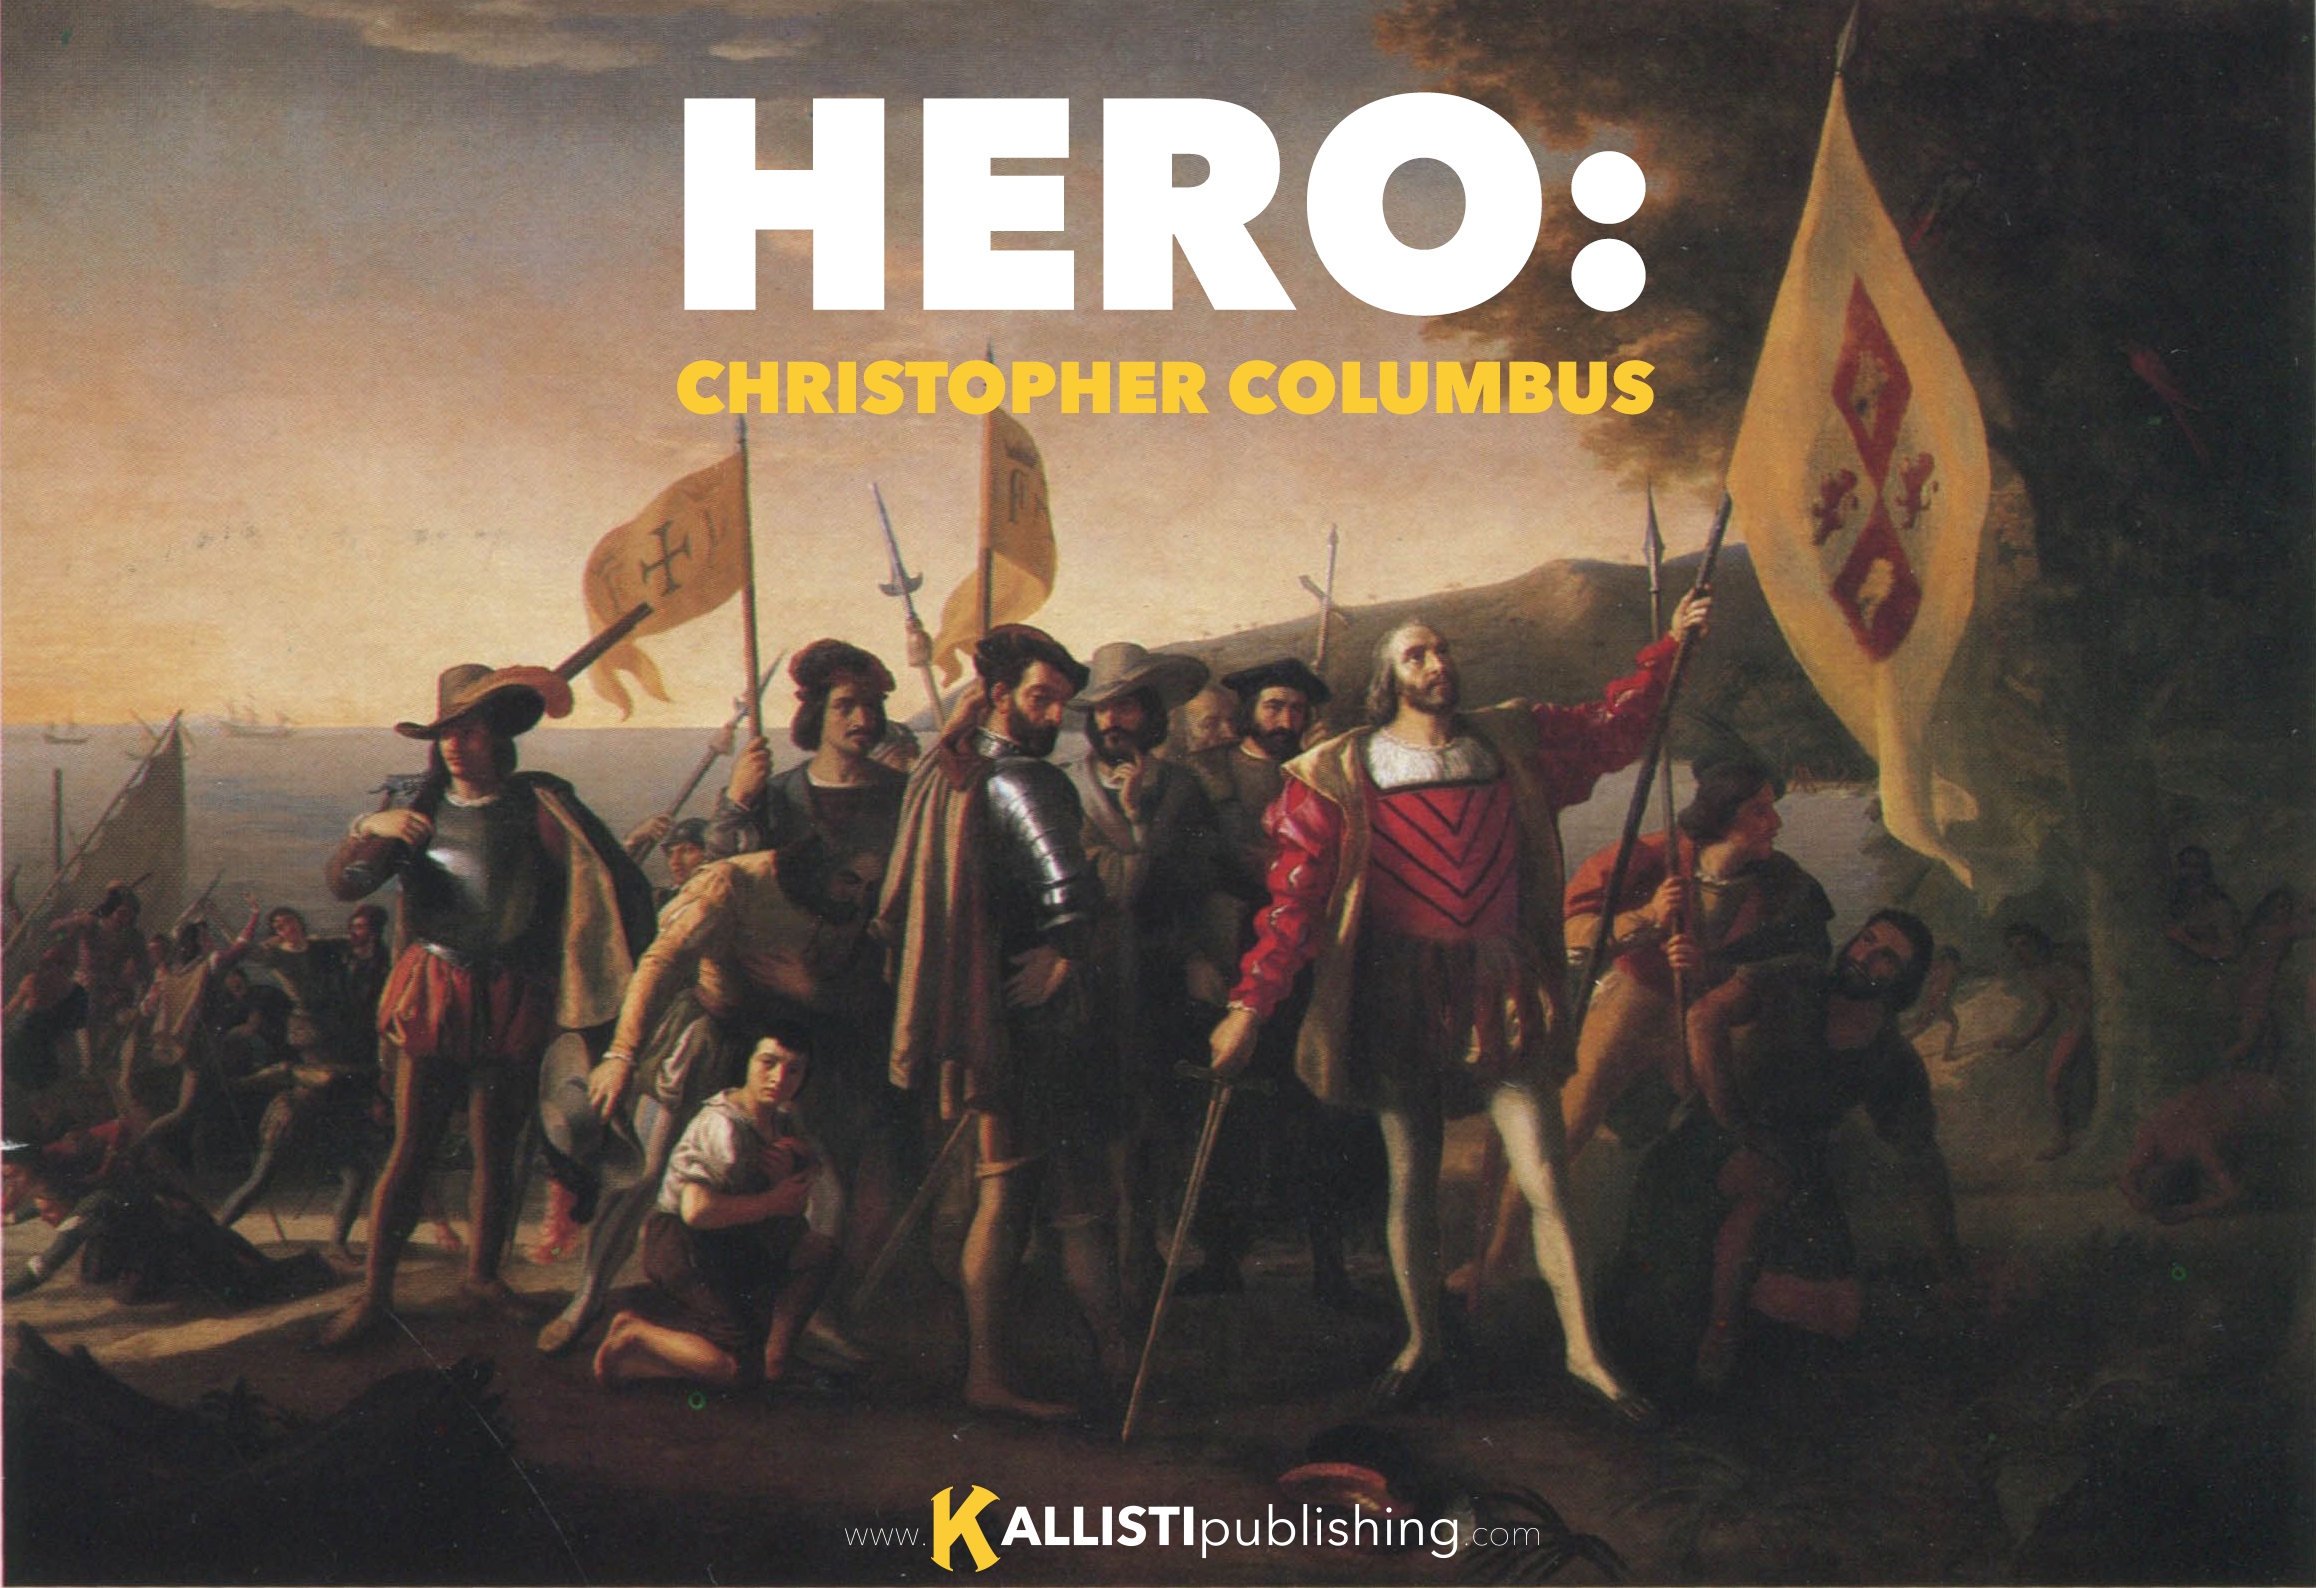 The Story of a Hero: Christopher Columbus